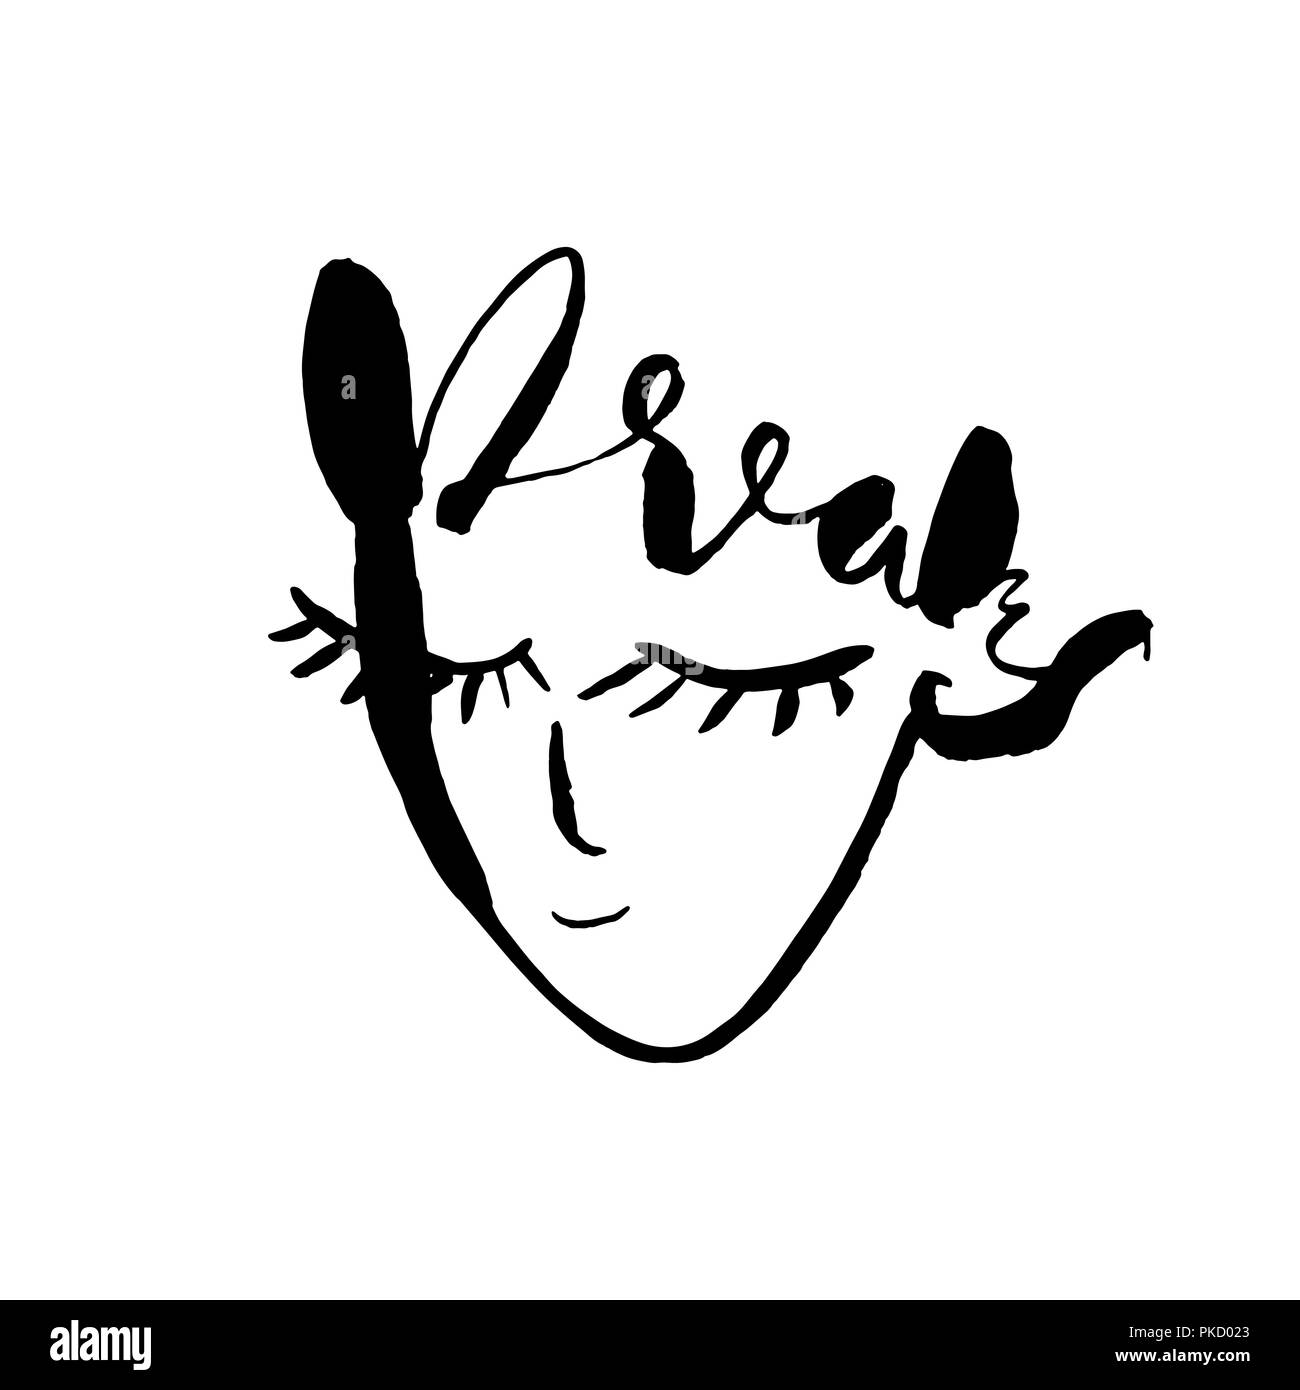 Dreams. Lettering poster with face. Close eyes. Hand drawn art work. Vector illustration. Stock Vector